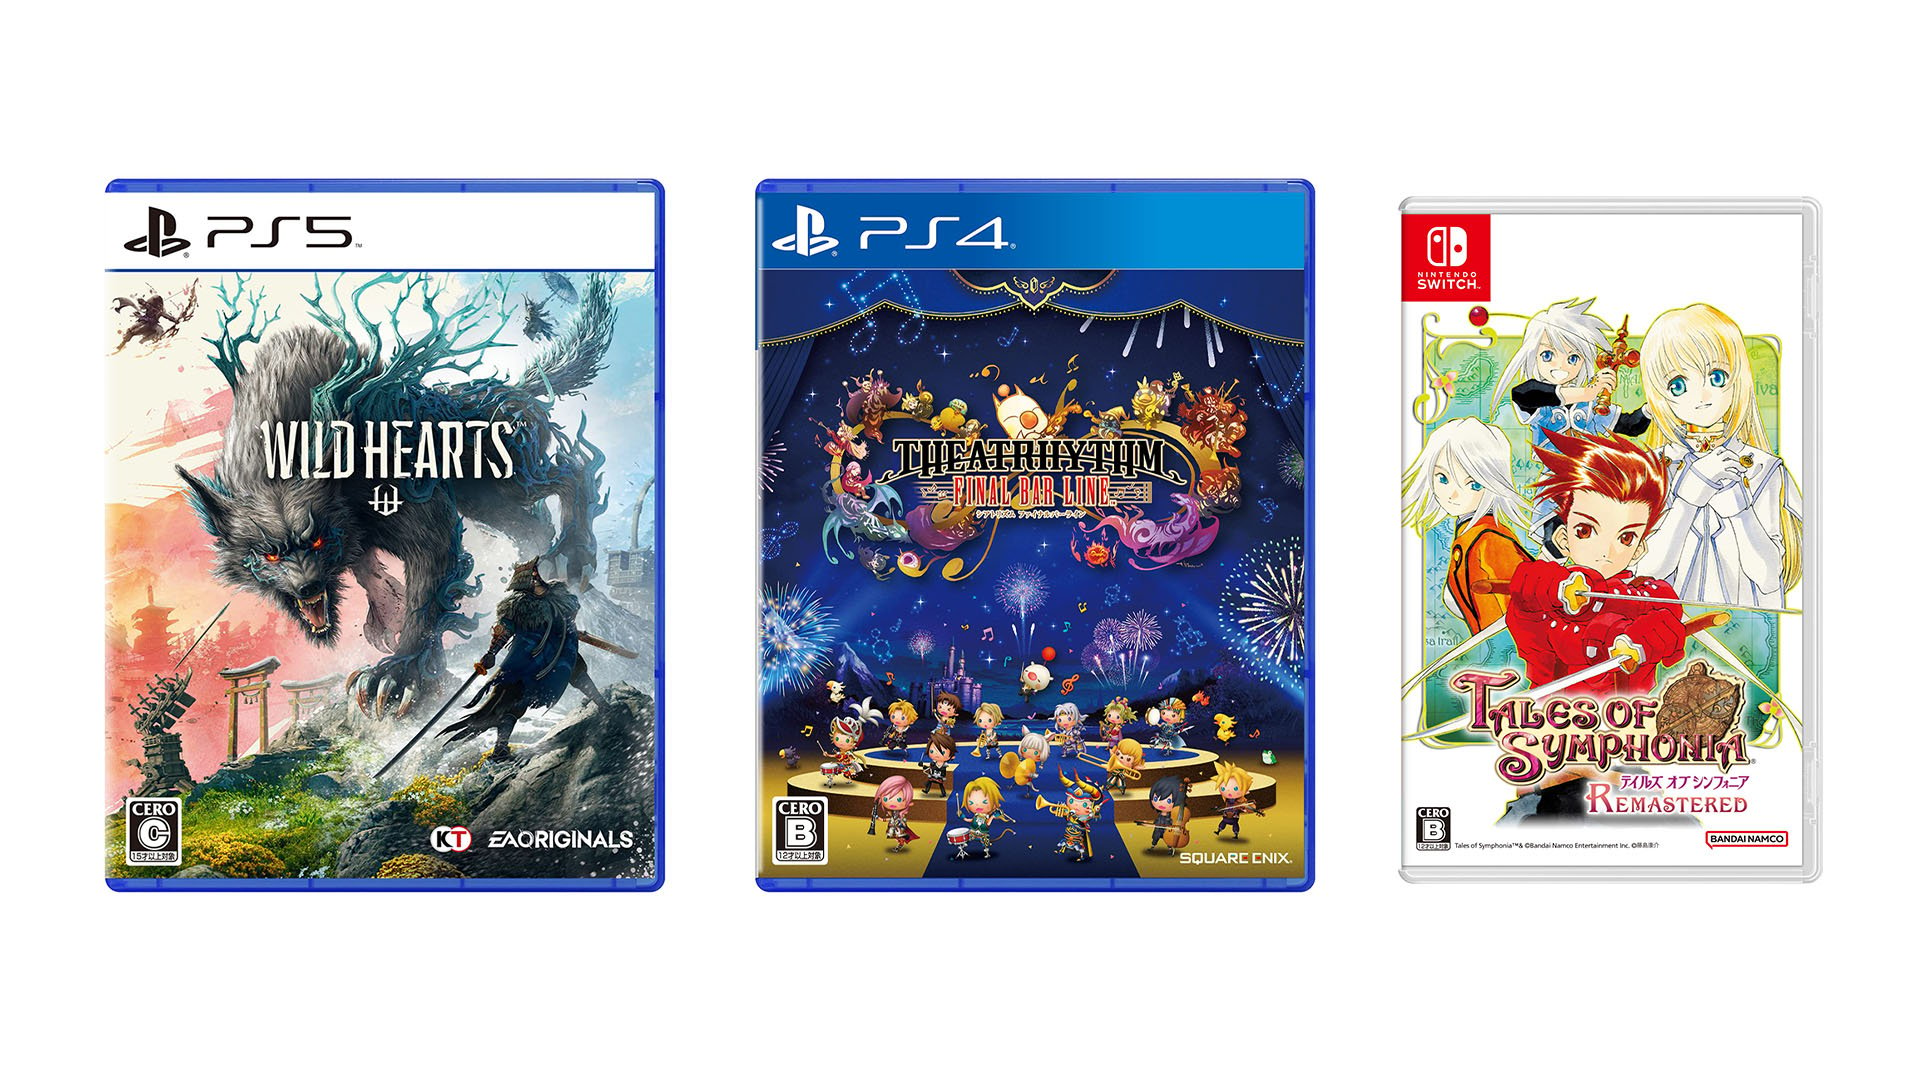 This Week\'s Japanese Bar Game Tales Final Releases: Remastered, Gematsu more WILD Symphonia Theatrhythm: - of HEARTS, Line